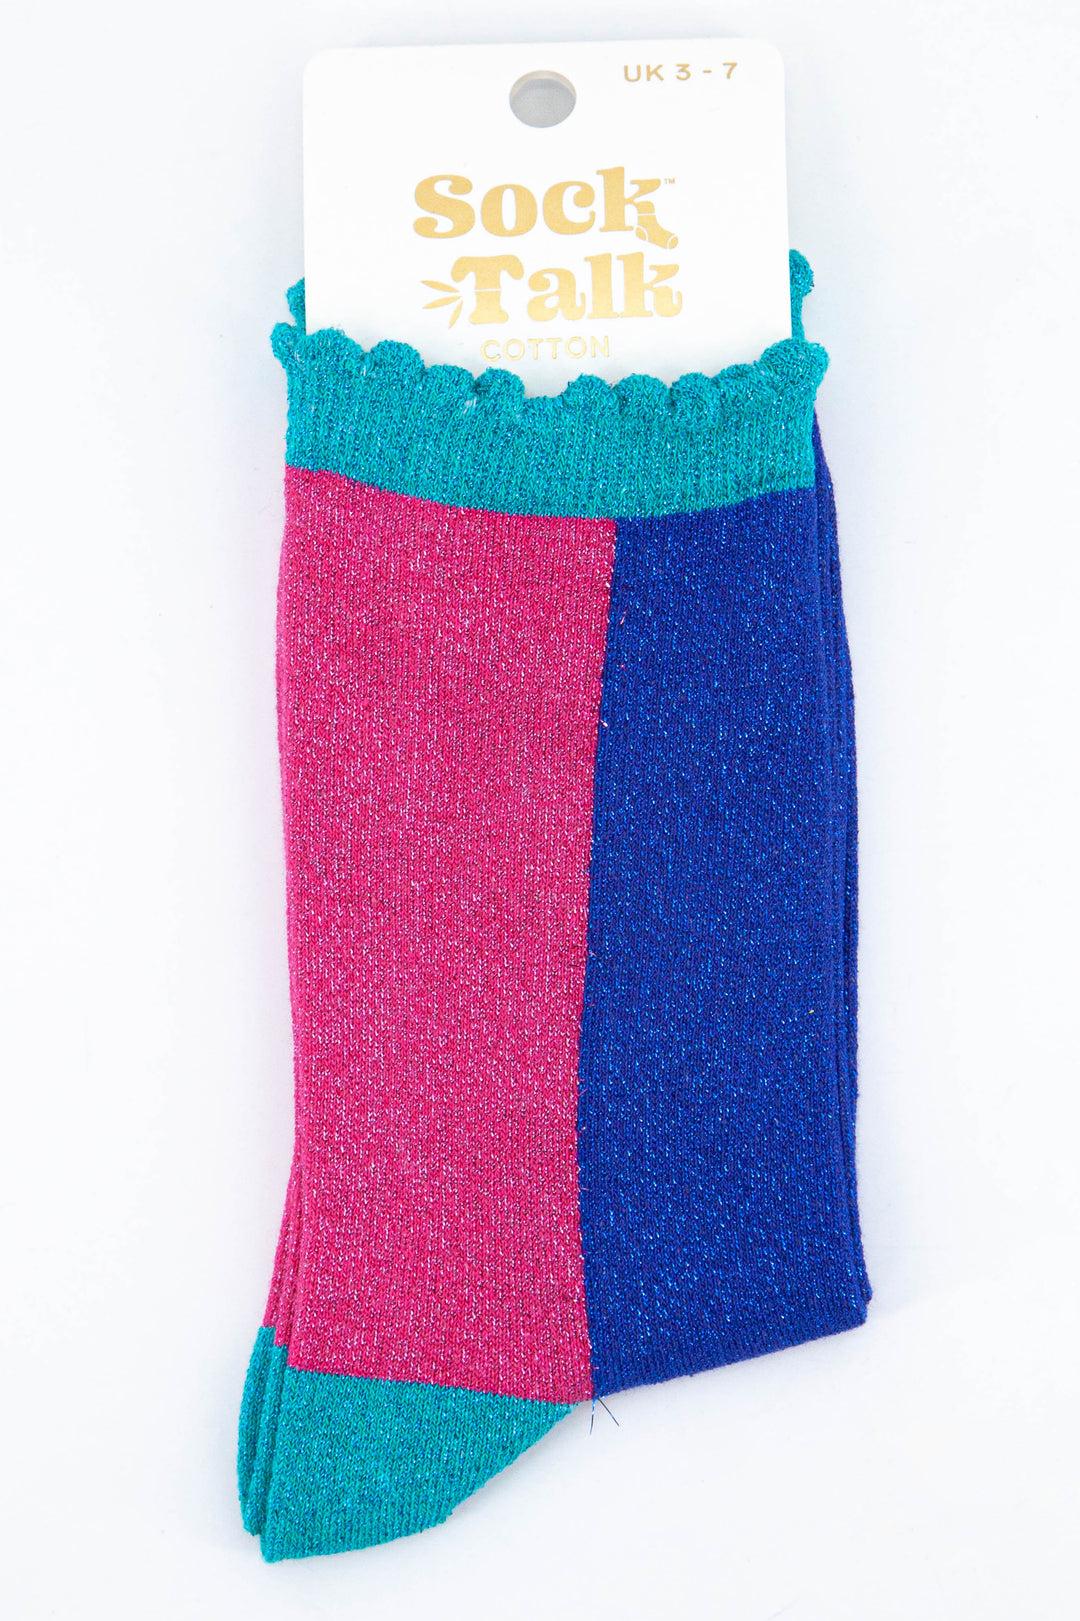 sparkly blue and pink glitter ankle socks uk size 3-7